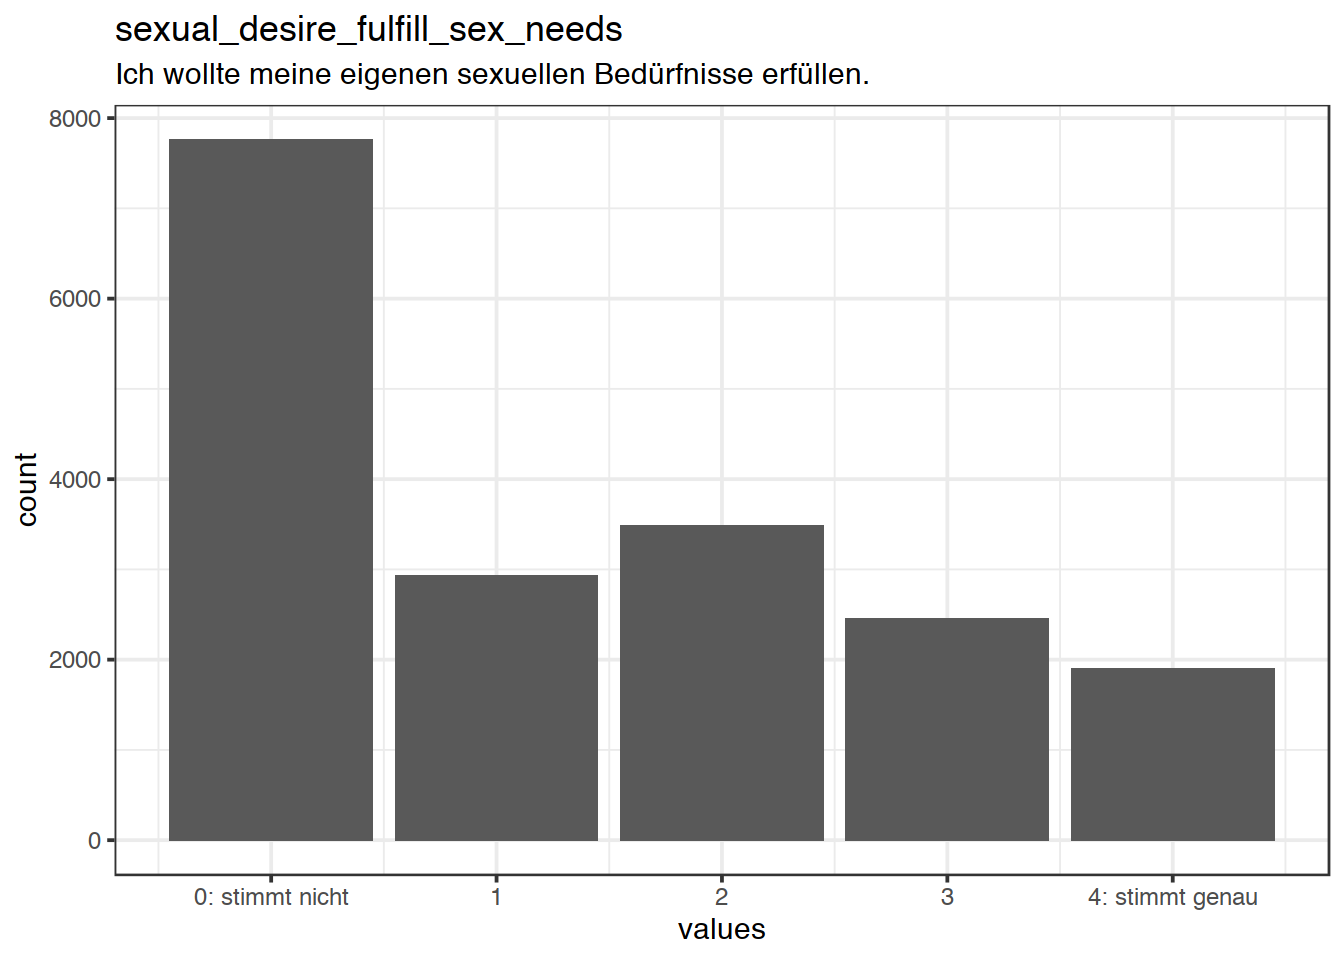 Distribution of values for sexual_desire_fulfill_sex_needs